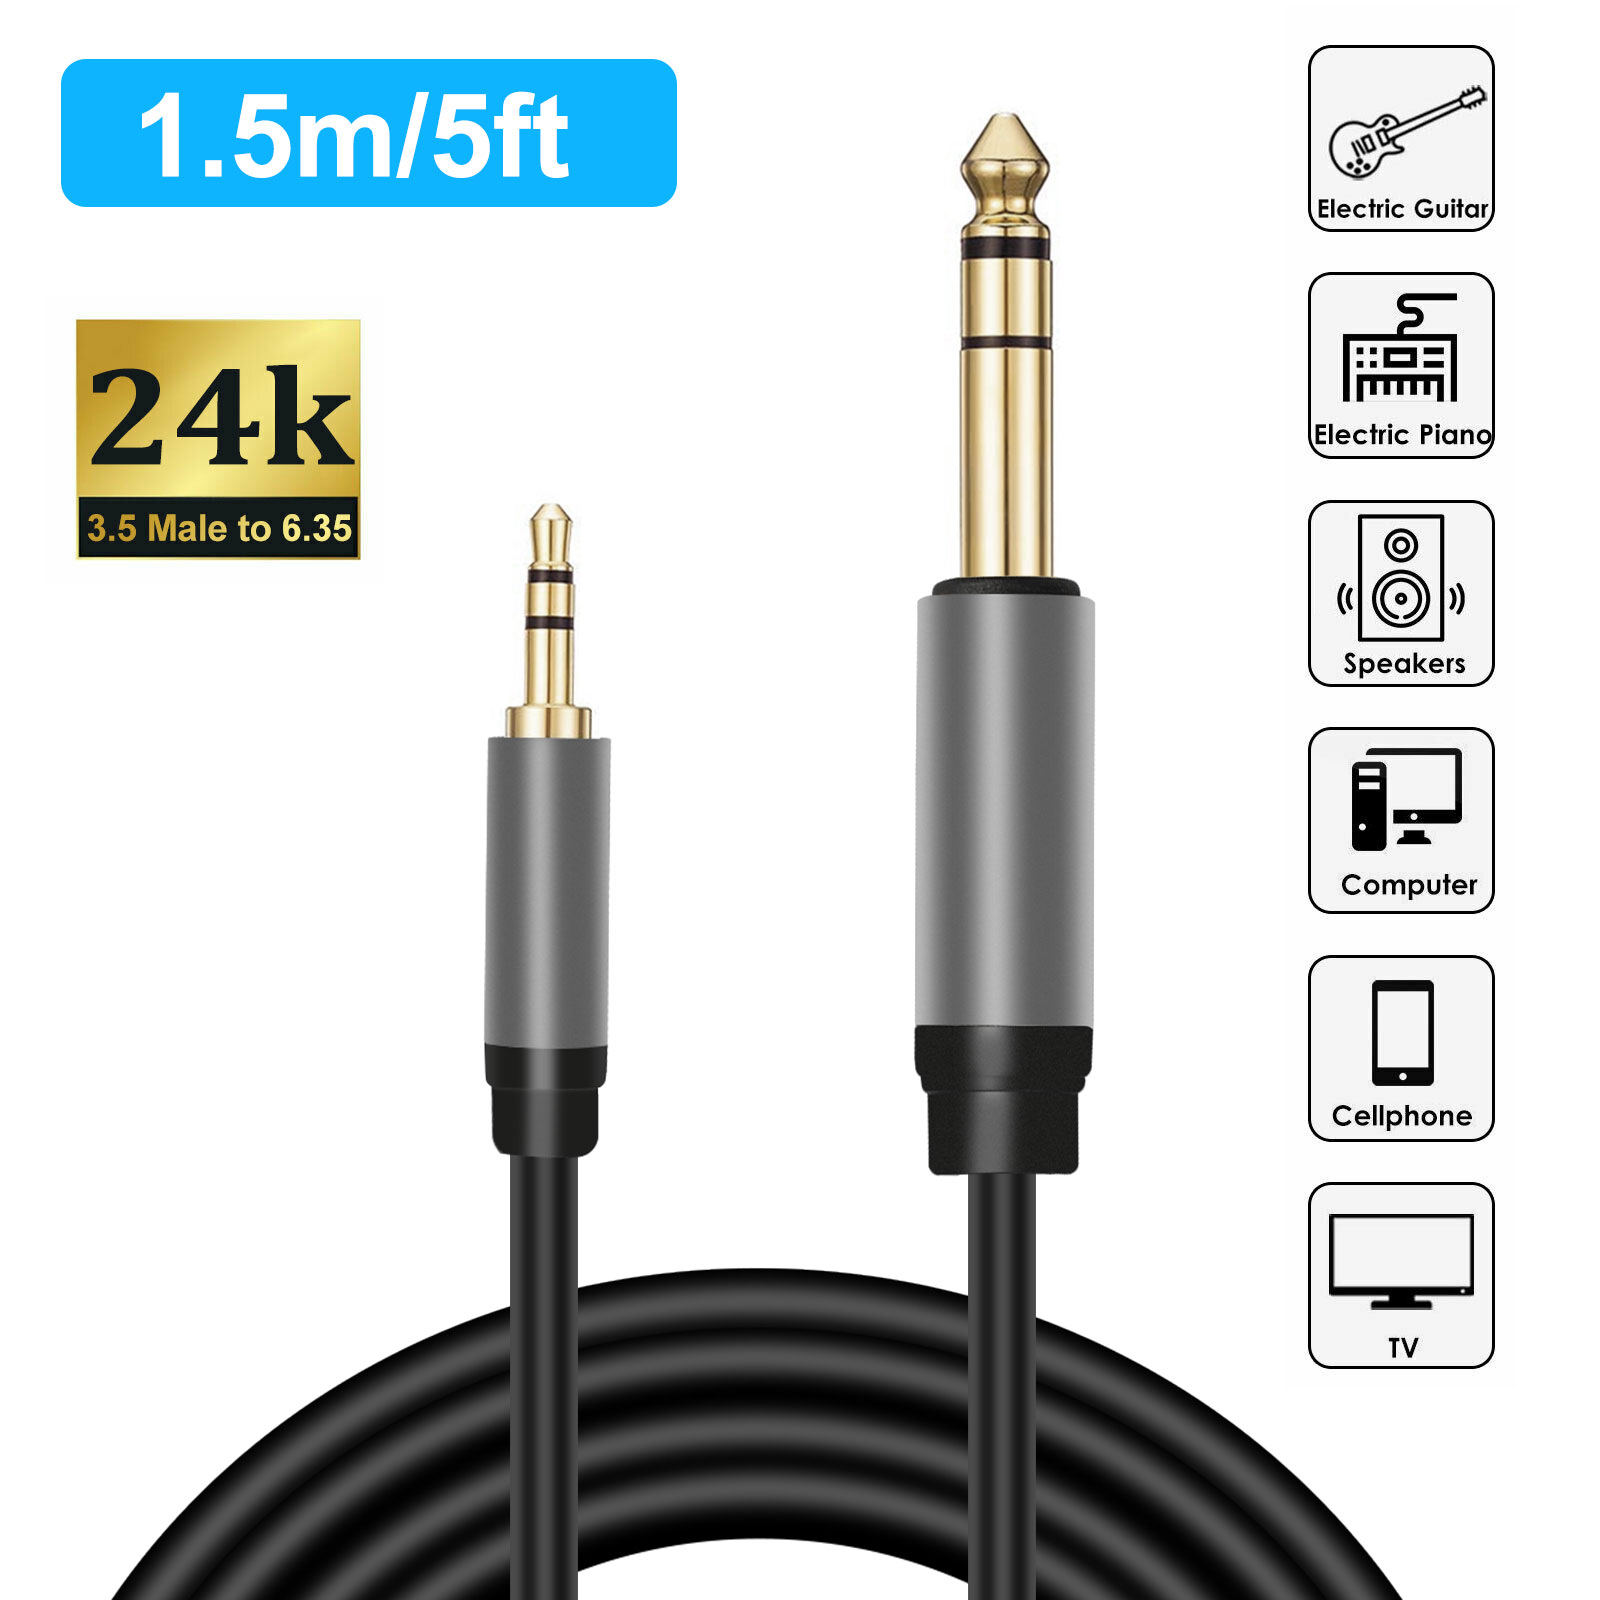 3SixT 3.5 mm Jack Audio Cable with Textile Jacket and Metal Connectors for Table 